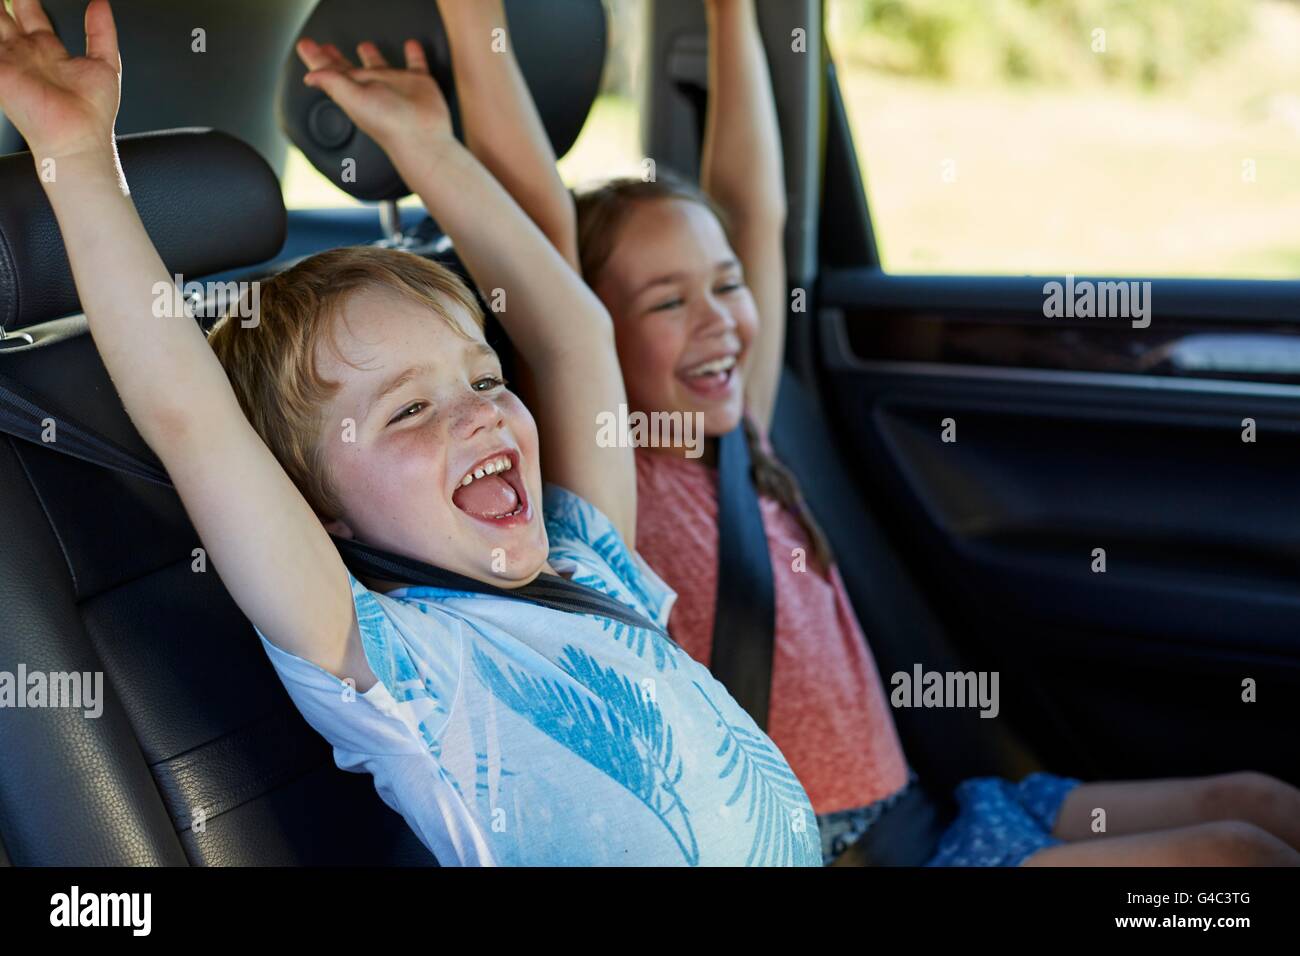 MODEL RELEASED. Brother and sister in the back seat of the car with arms raised. Stock Photo